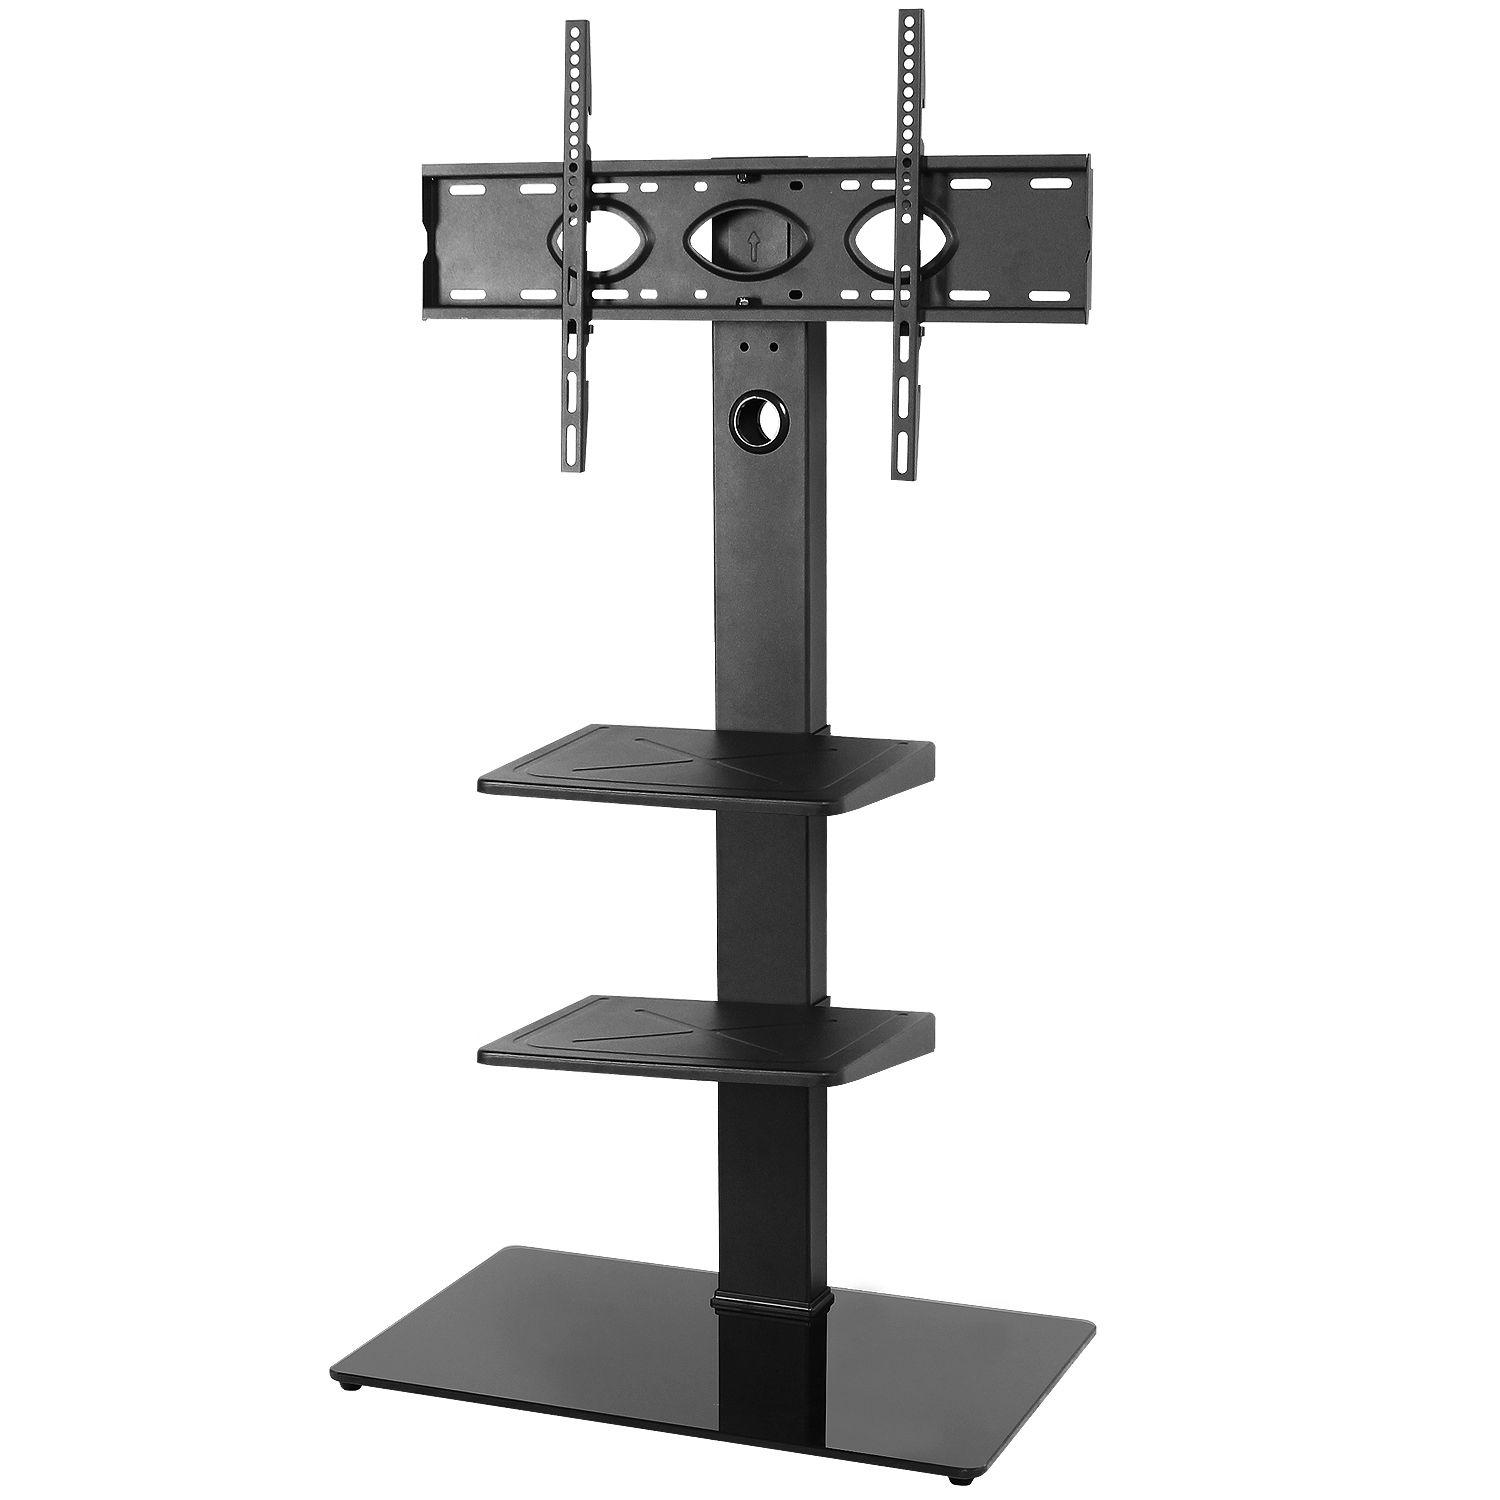 5rcom Floor Corner Tall Tv Stand With Swivel Mount For 32 Throughout Modern Floor Tv Stands With Swivel Metal Mount (View 8 of 15)